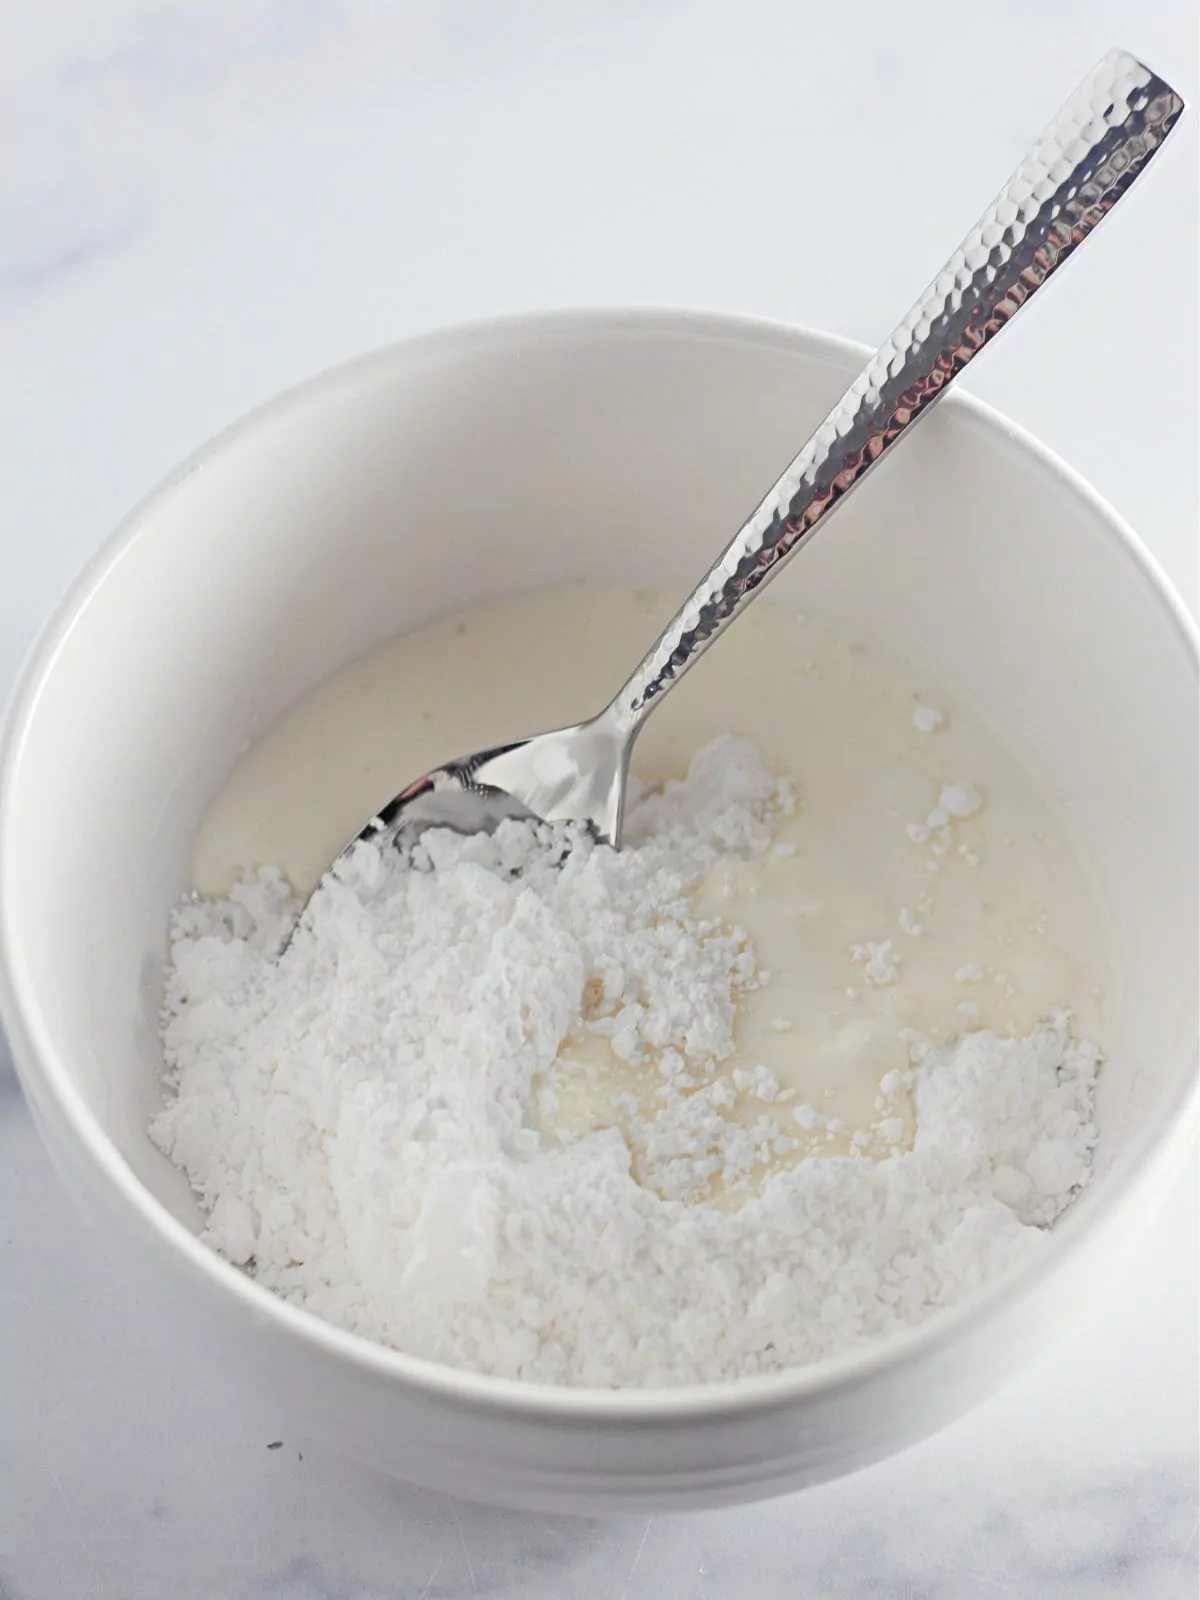 Powdered sugar glaze in white bowl with spoon.